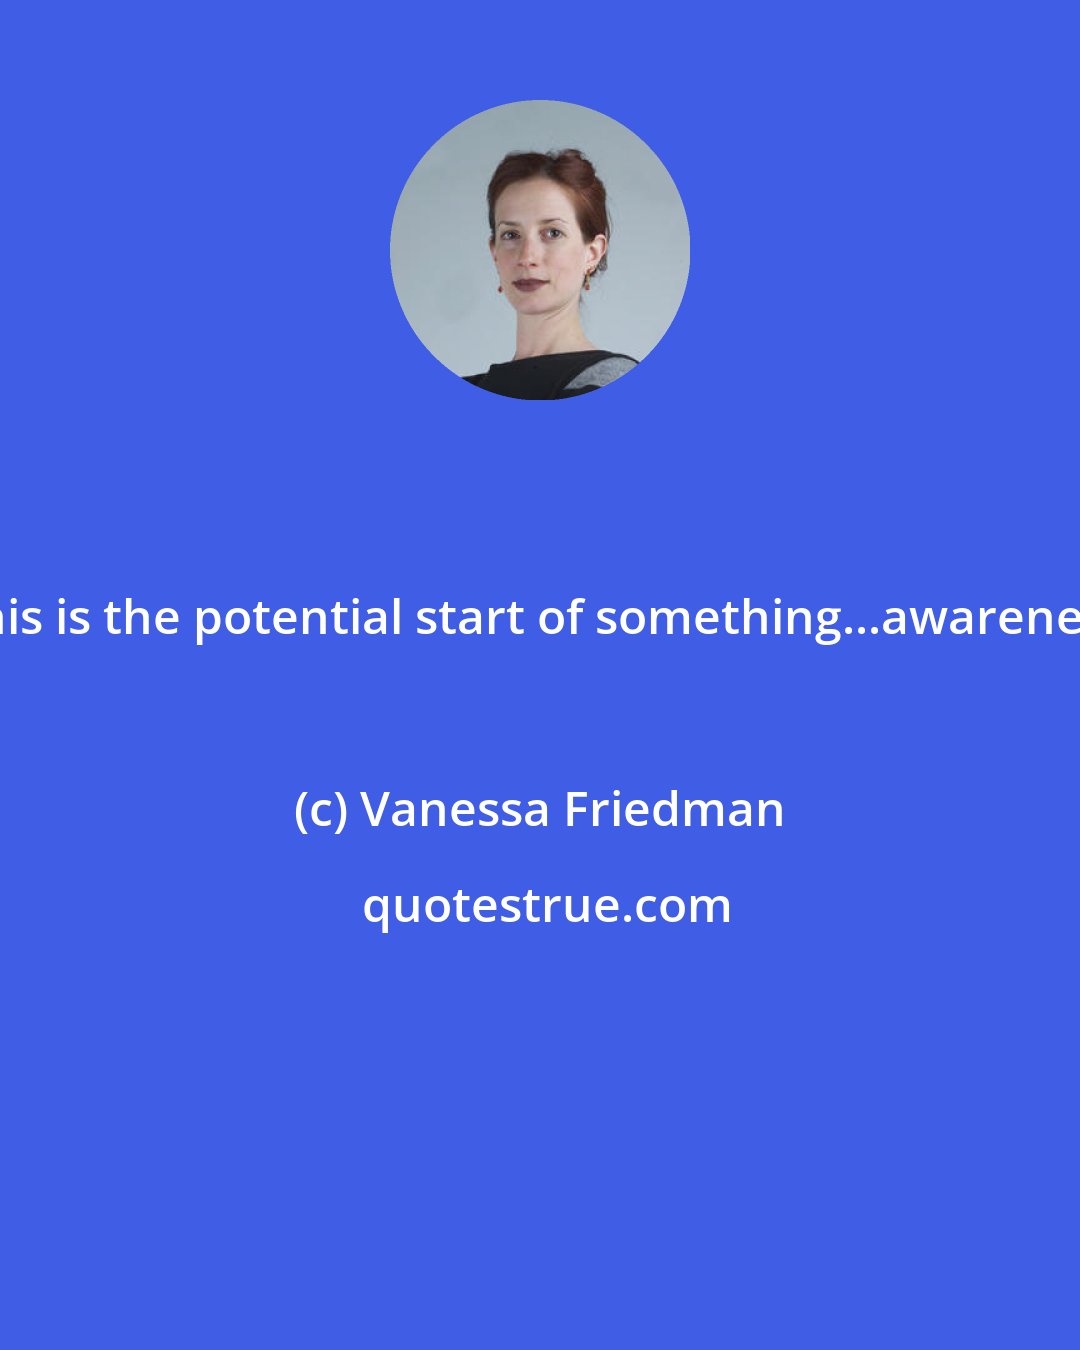 Vanessa Friedman: This is the potential start of something...awareness